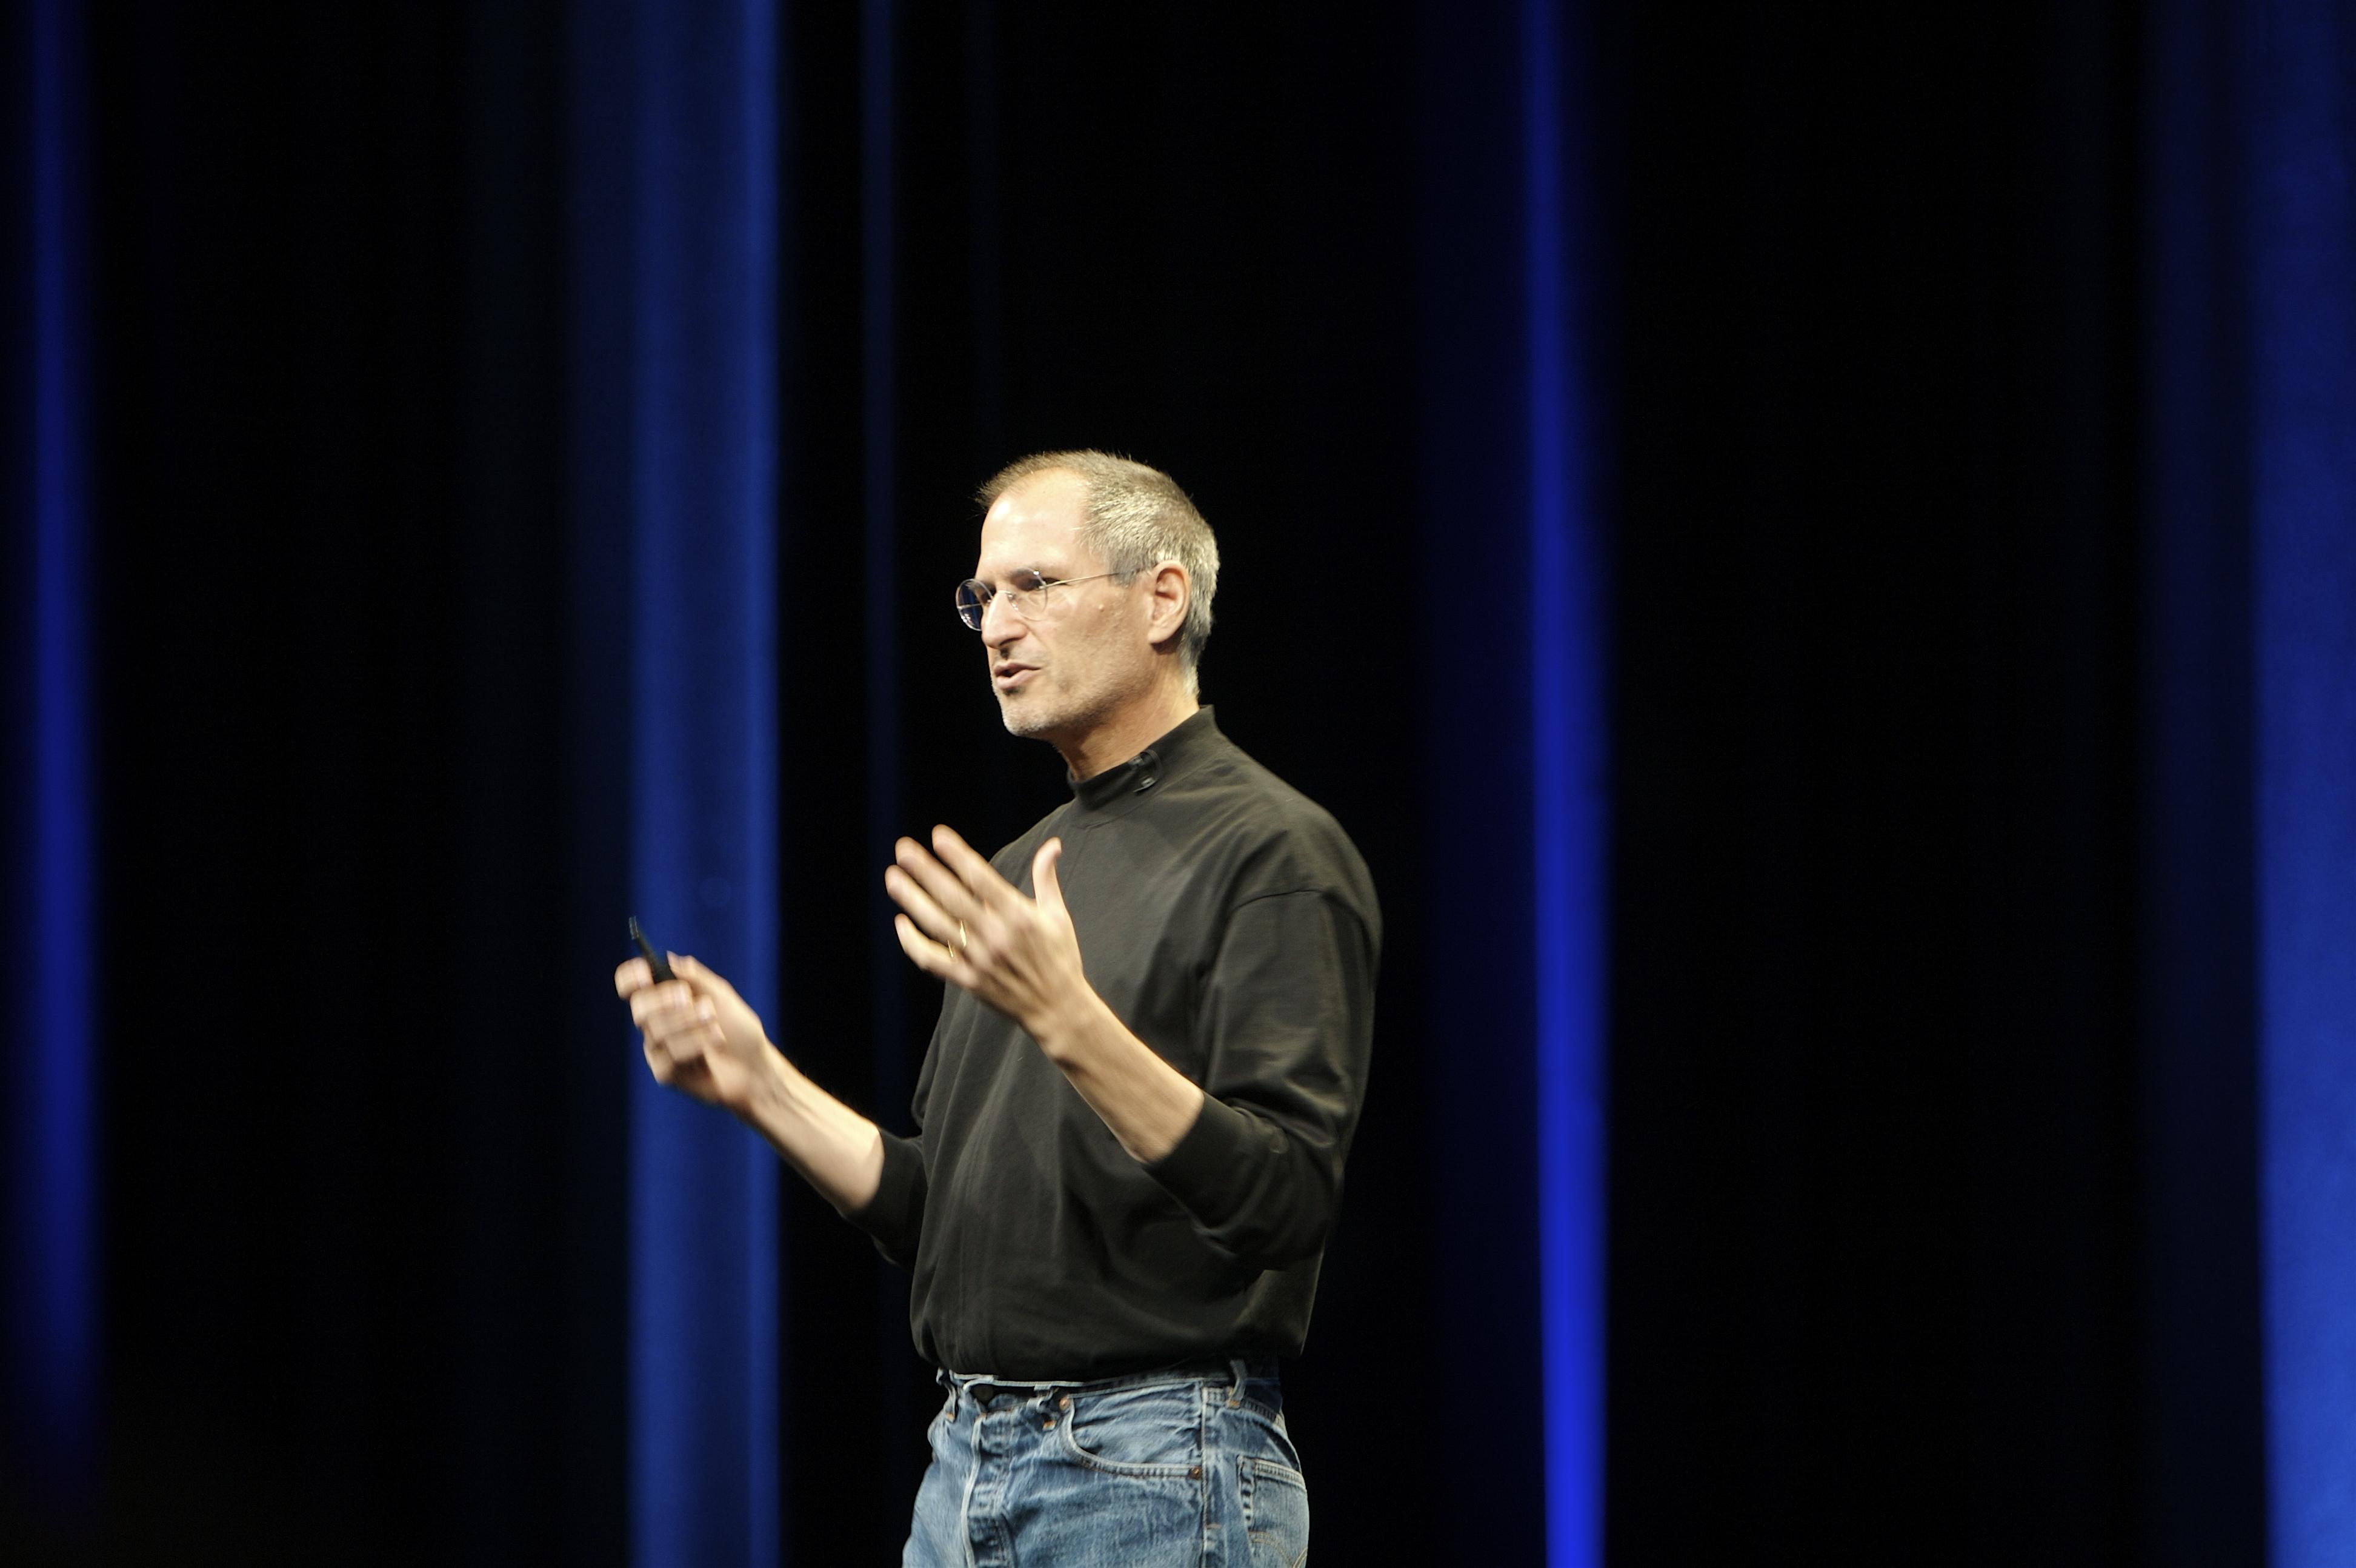 15 Inspiring Quotes From Steve Jobs To Rekindle Your Desire For Excellence